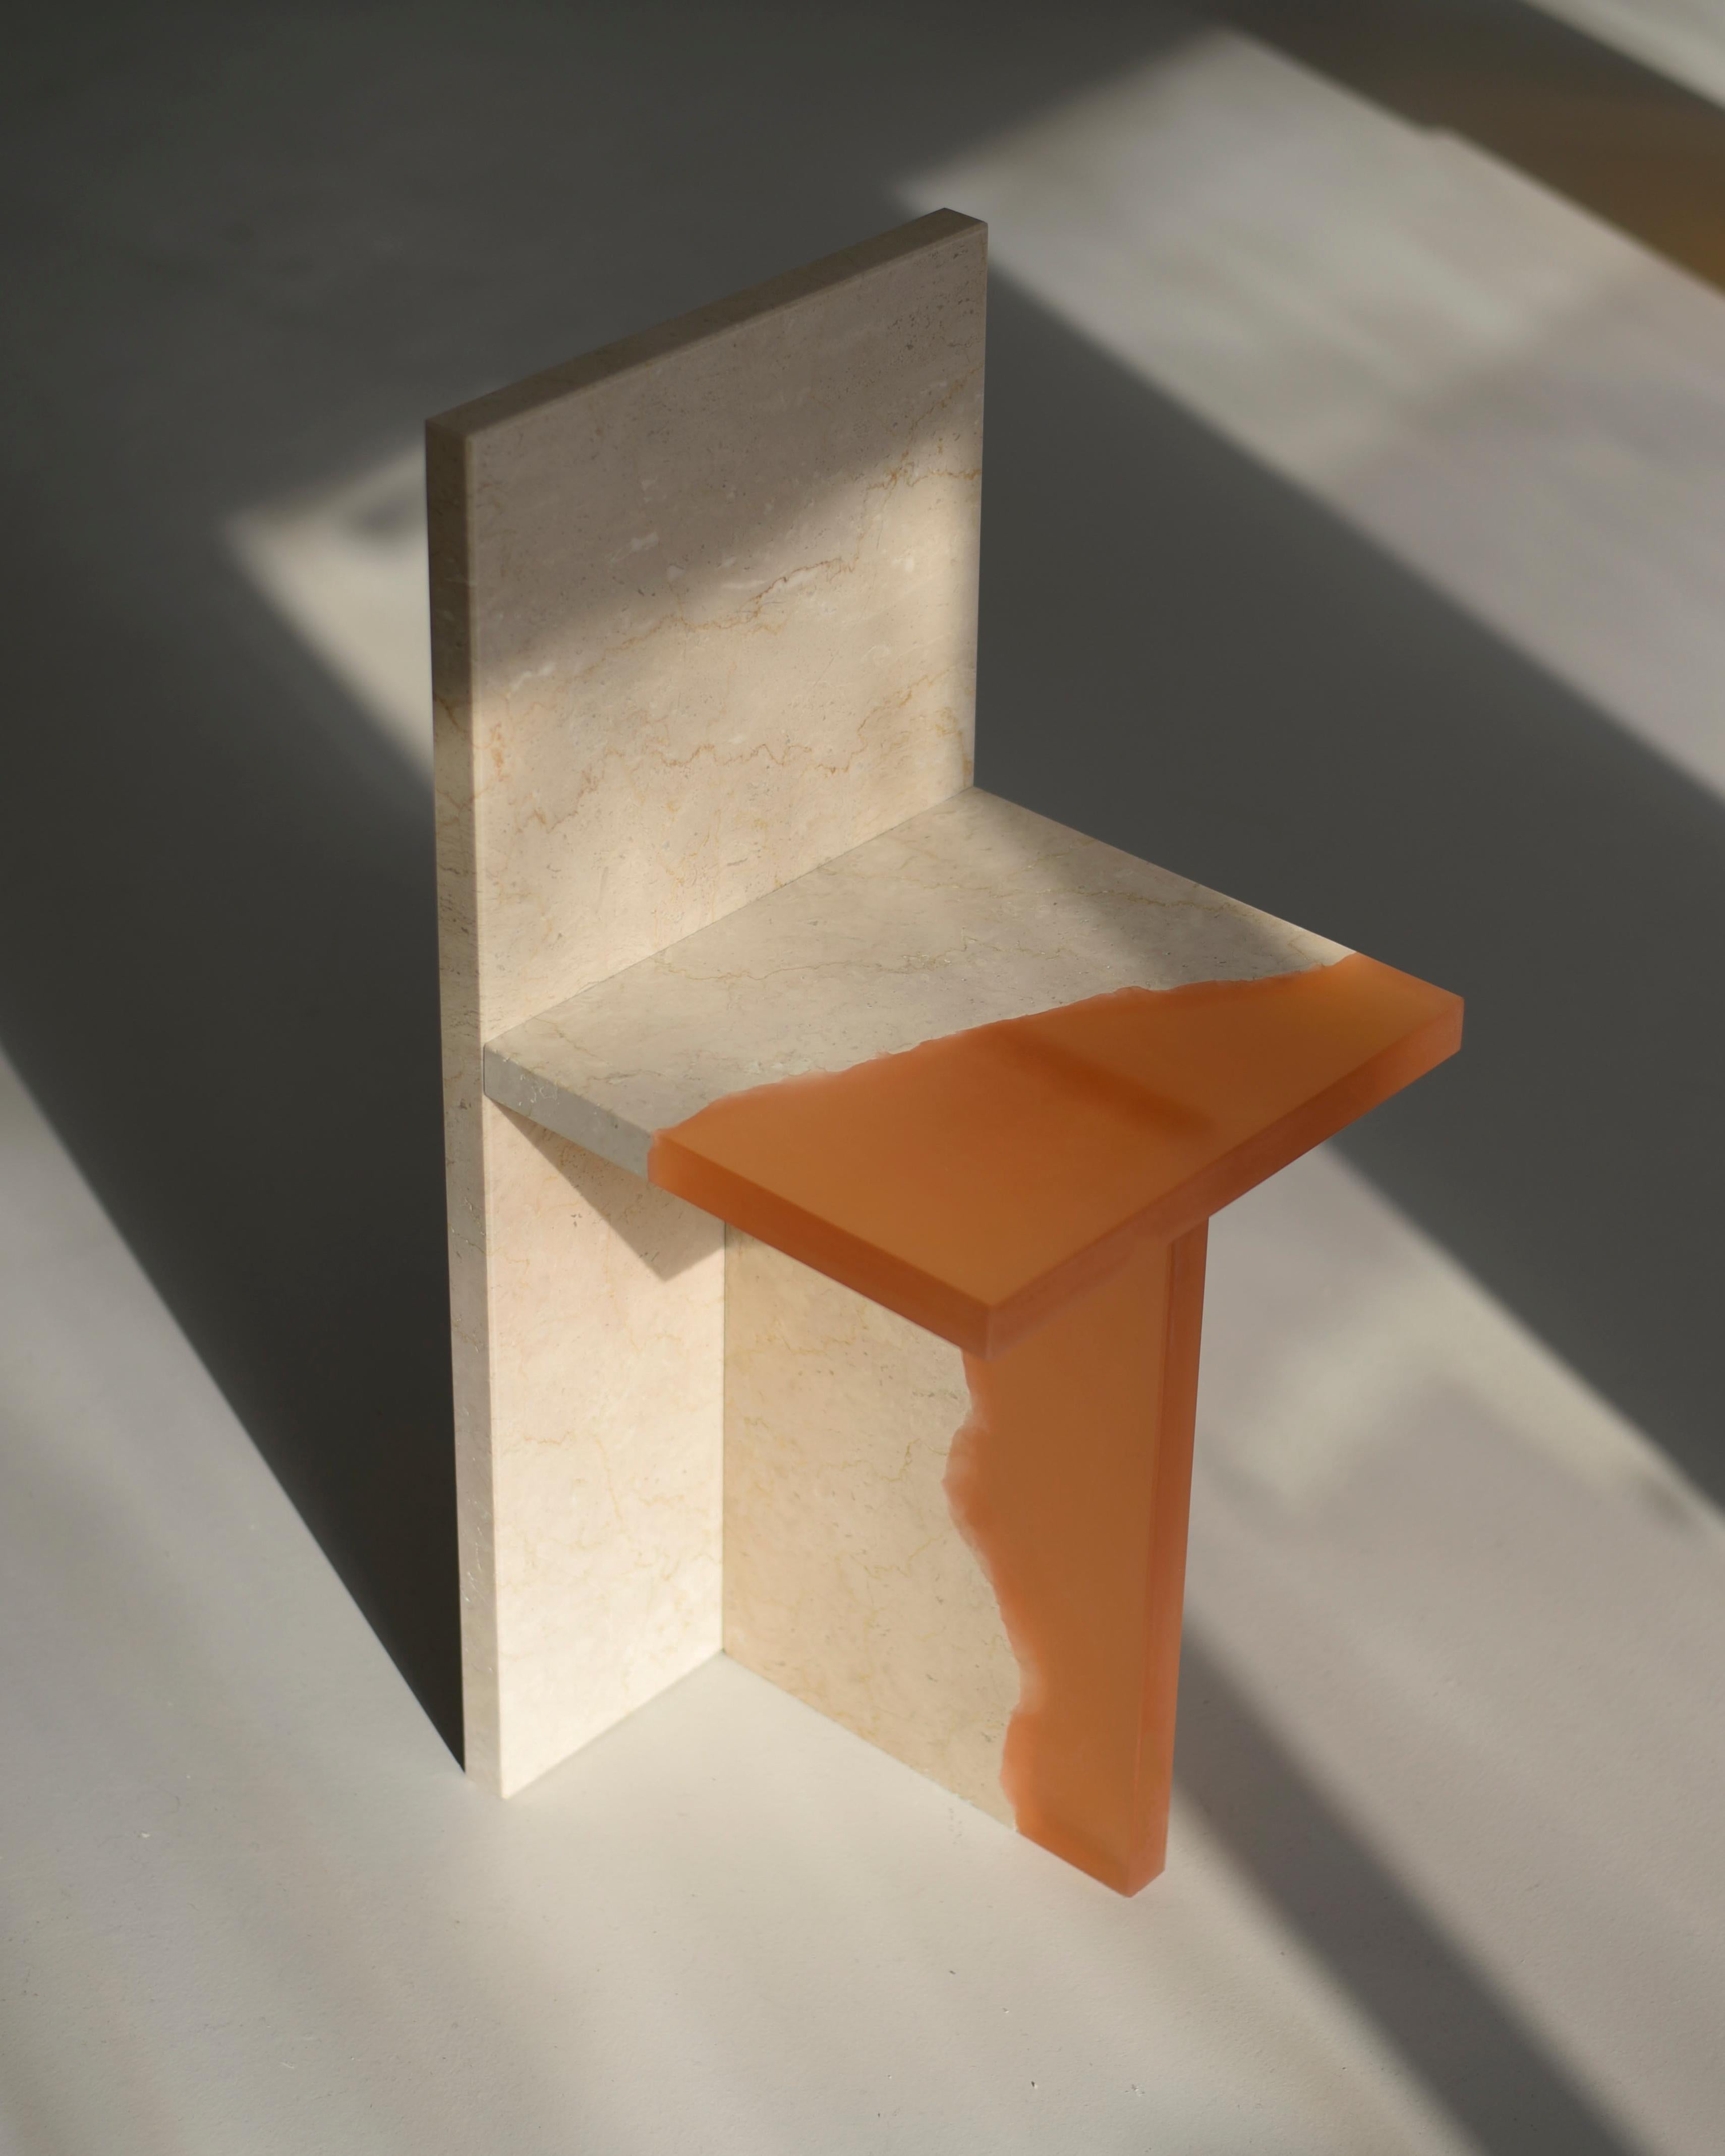 Set of crystal marble fragment chair by Jang Hea Kyoung
Artist: Jang Hea Kyoung
Materials: Crystal resin and marble
Dimensions: 33 x 34 x 74 cm

Jang Hea Kyoung is based in Seoul, Republic of Korea. She searches for craft elements and makes